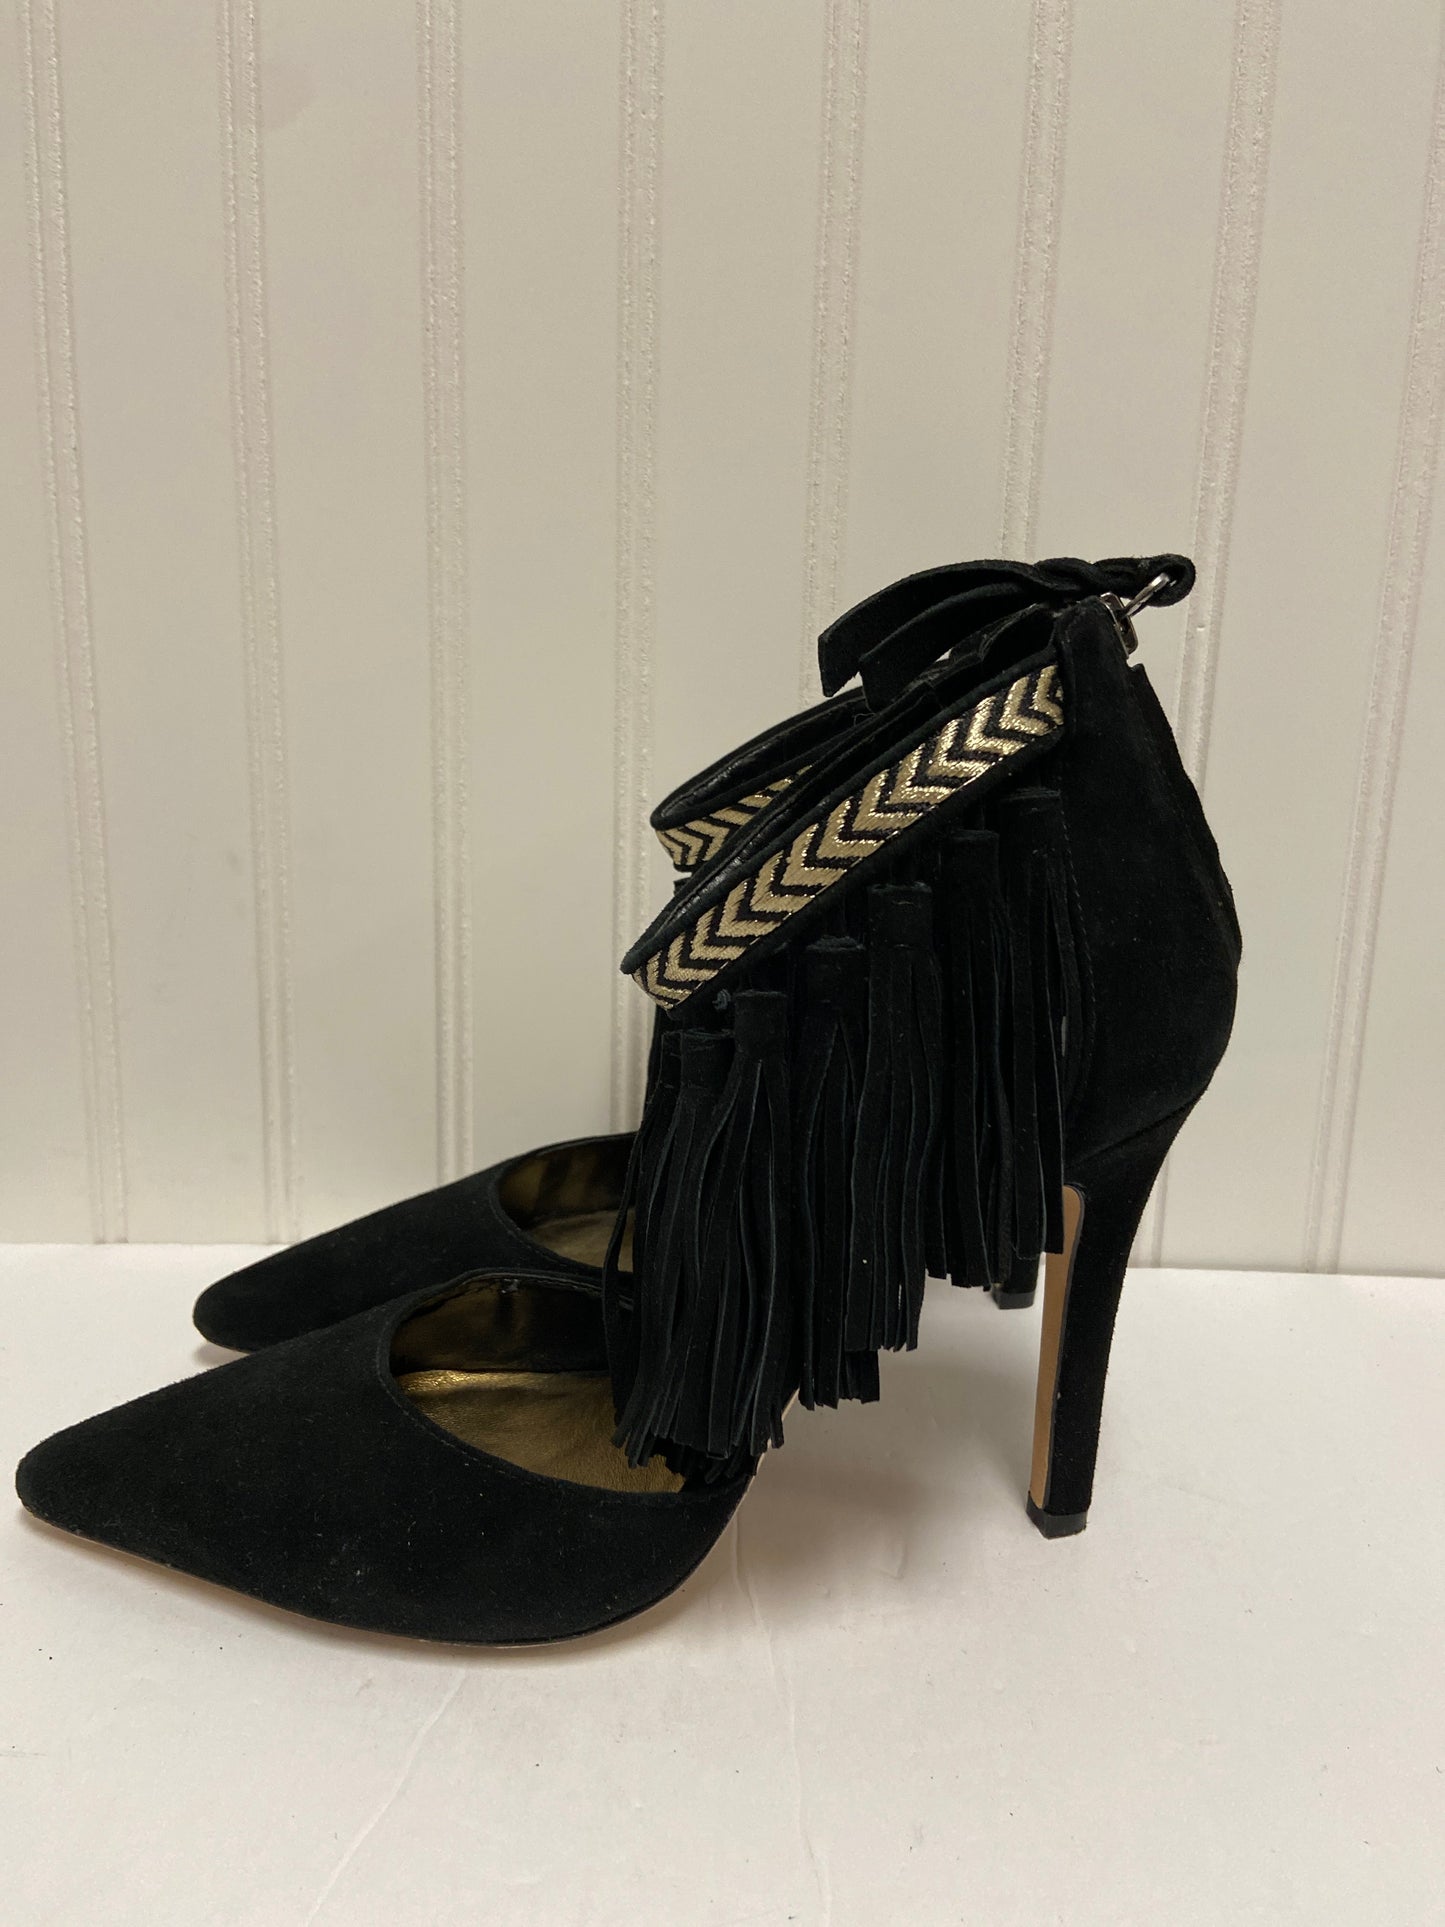 Shoes Heels Stiletto By Cmc  Size: 8.5